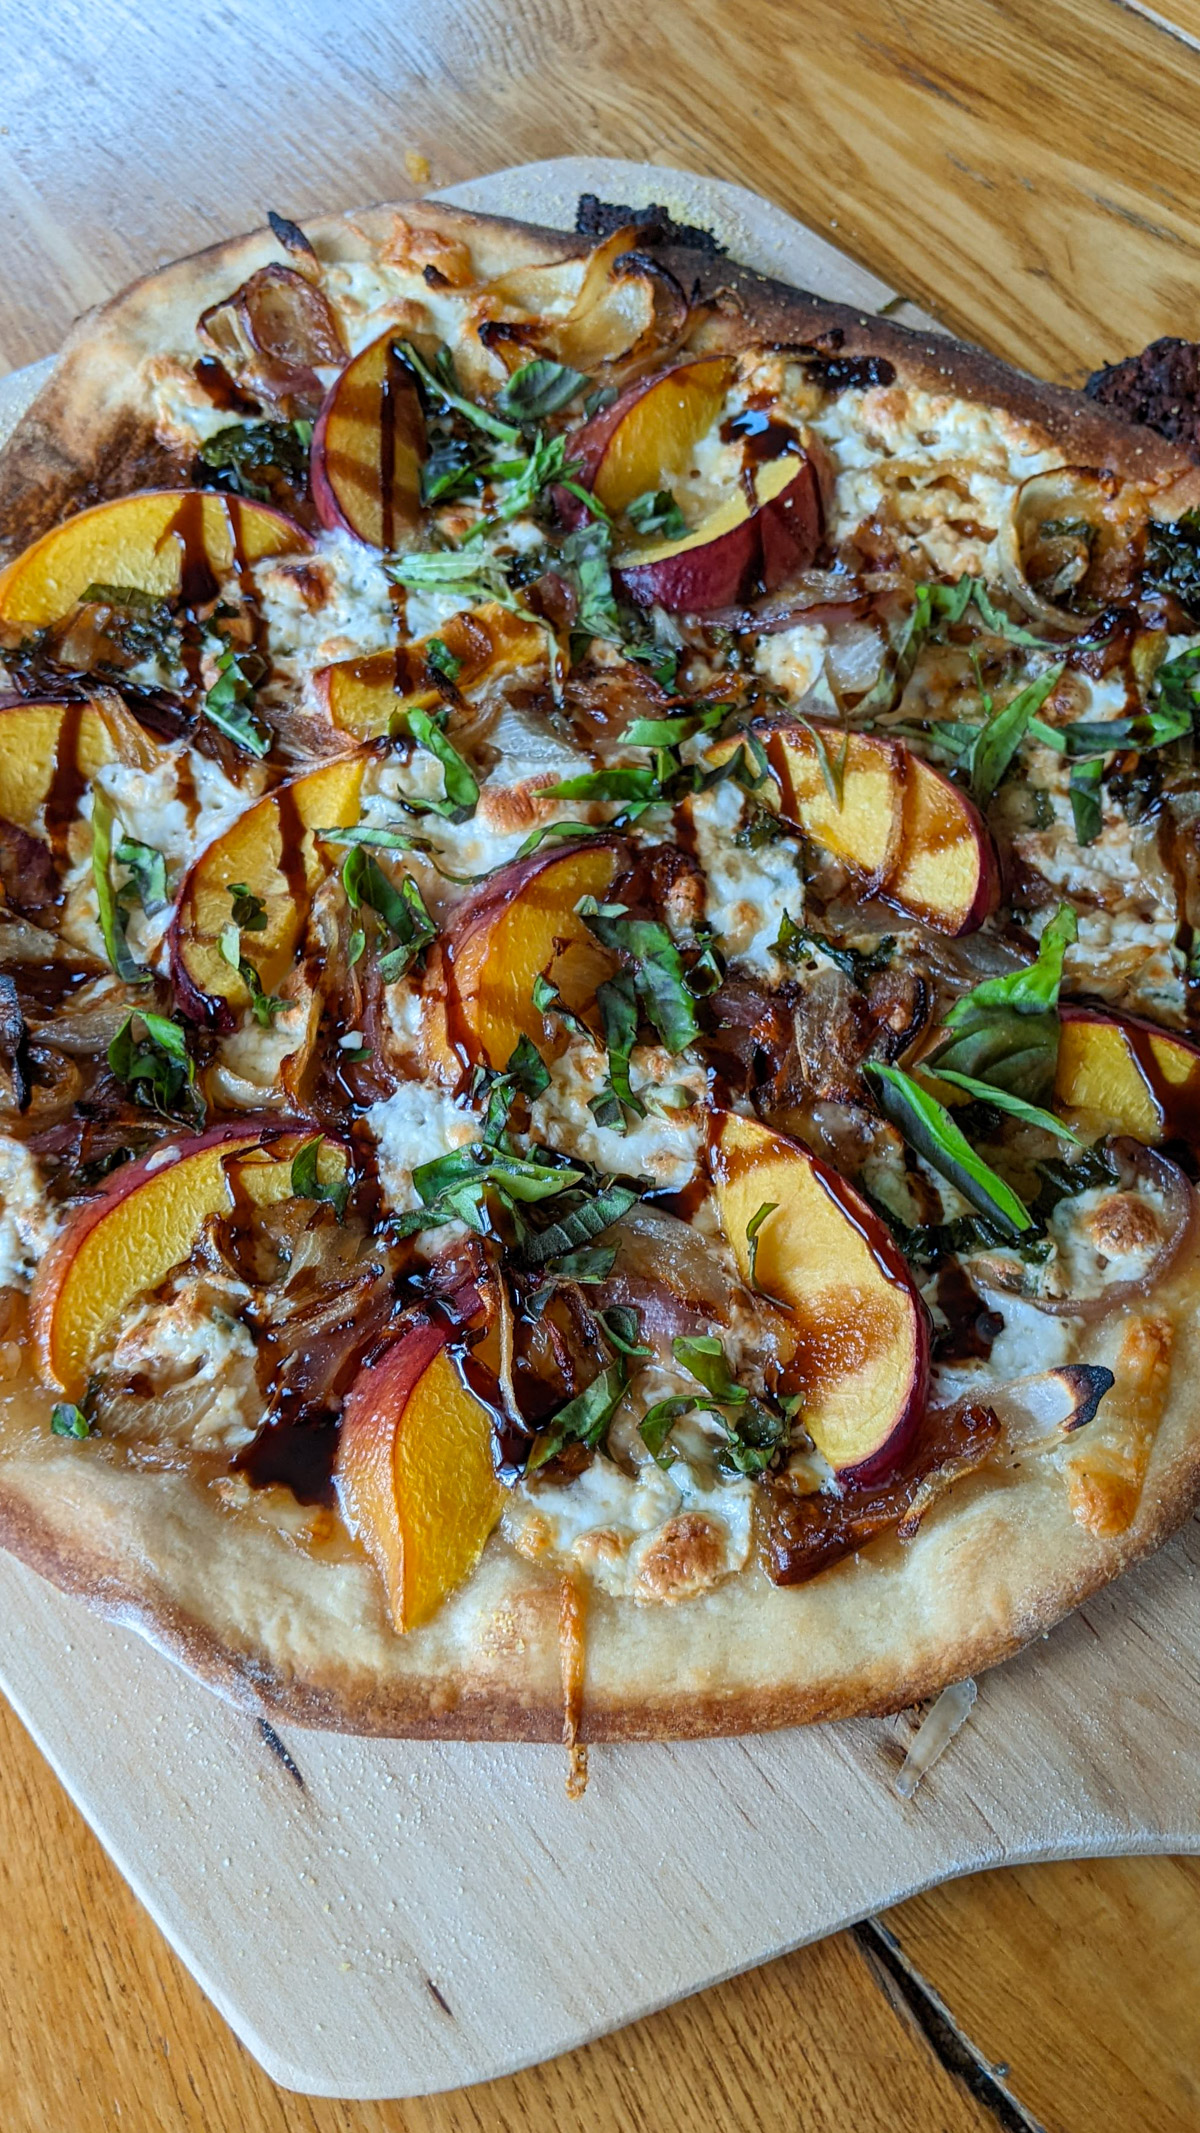 Peach pizza with caramelized onions, sliced peaches, arugula, cheese and balsamic glaze.